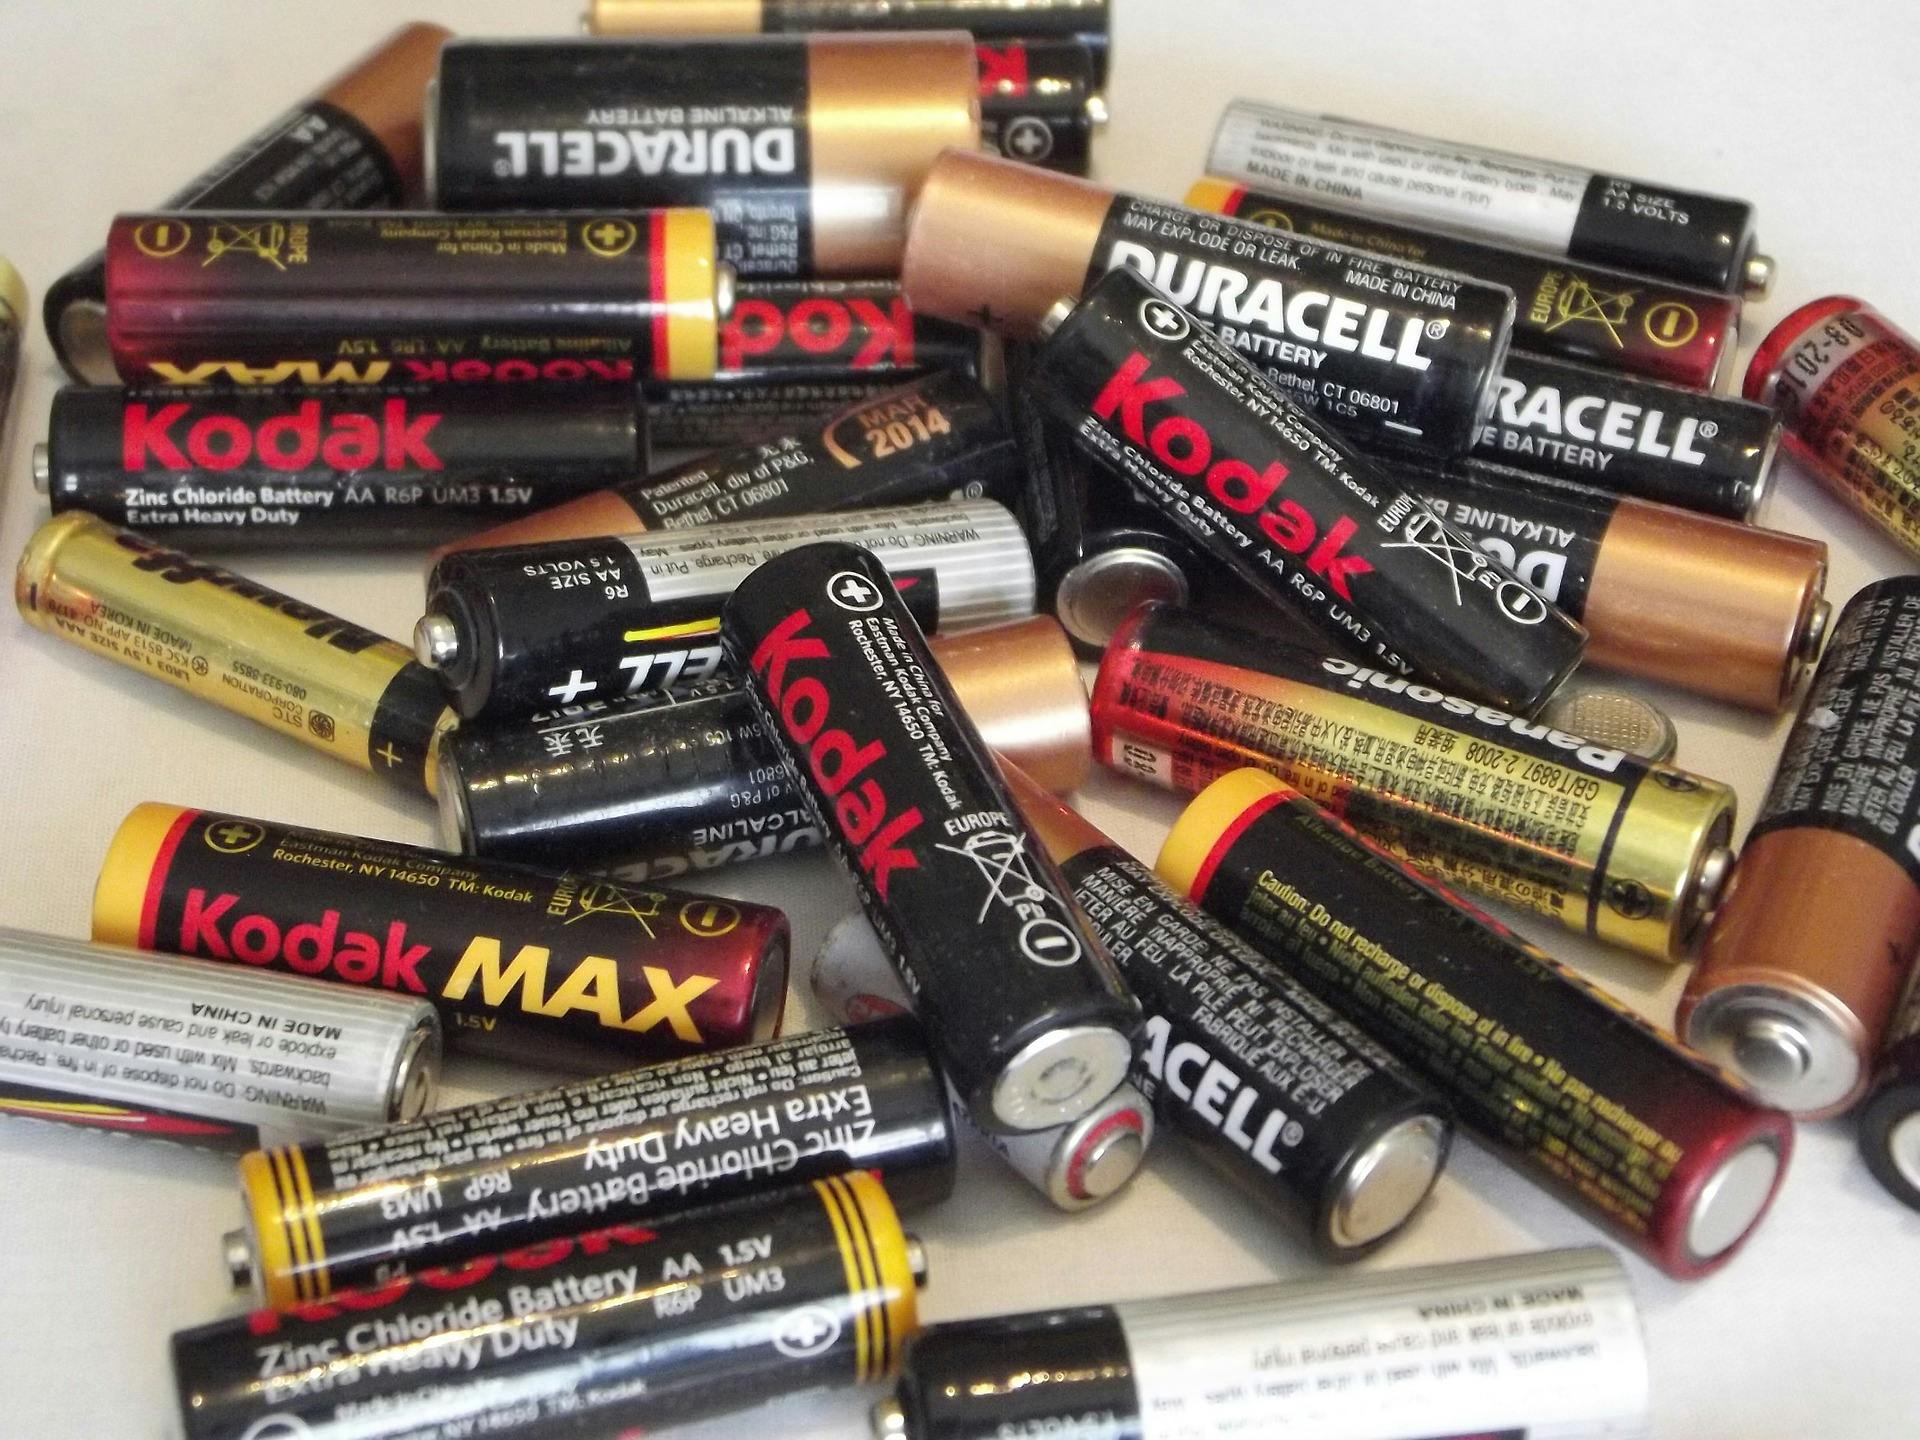 What can't be recycled batteries